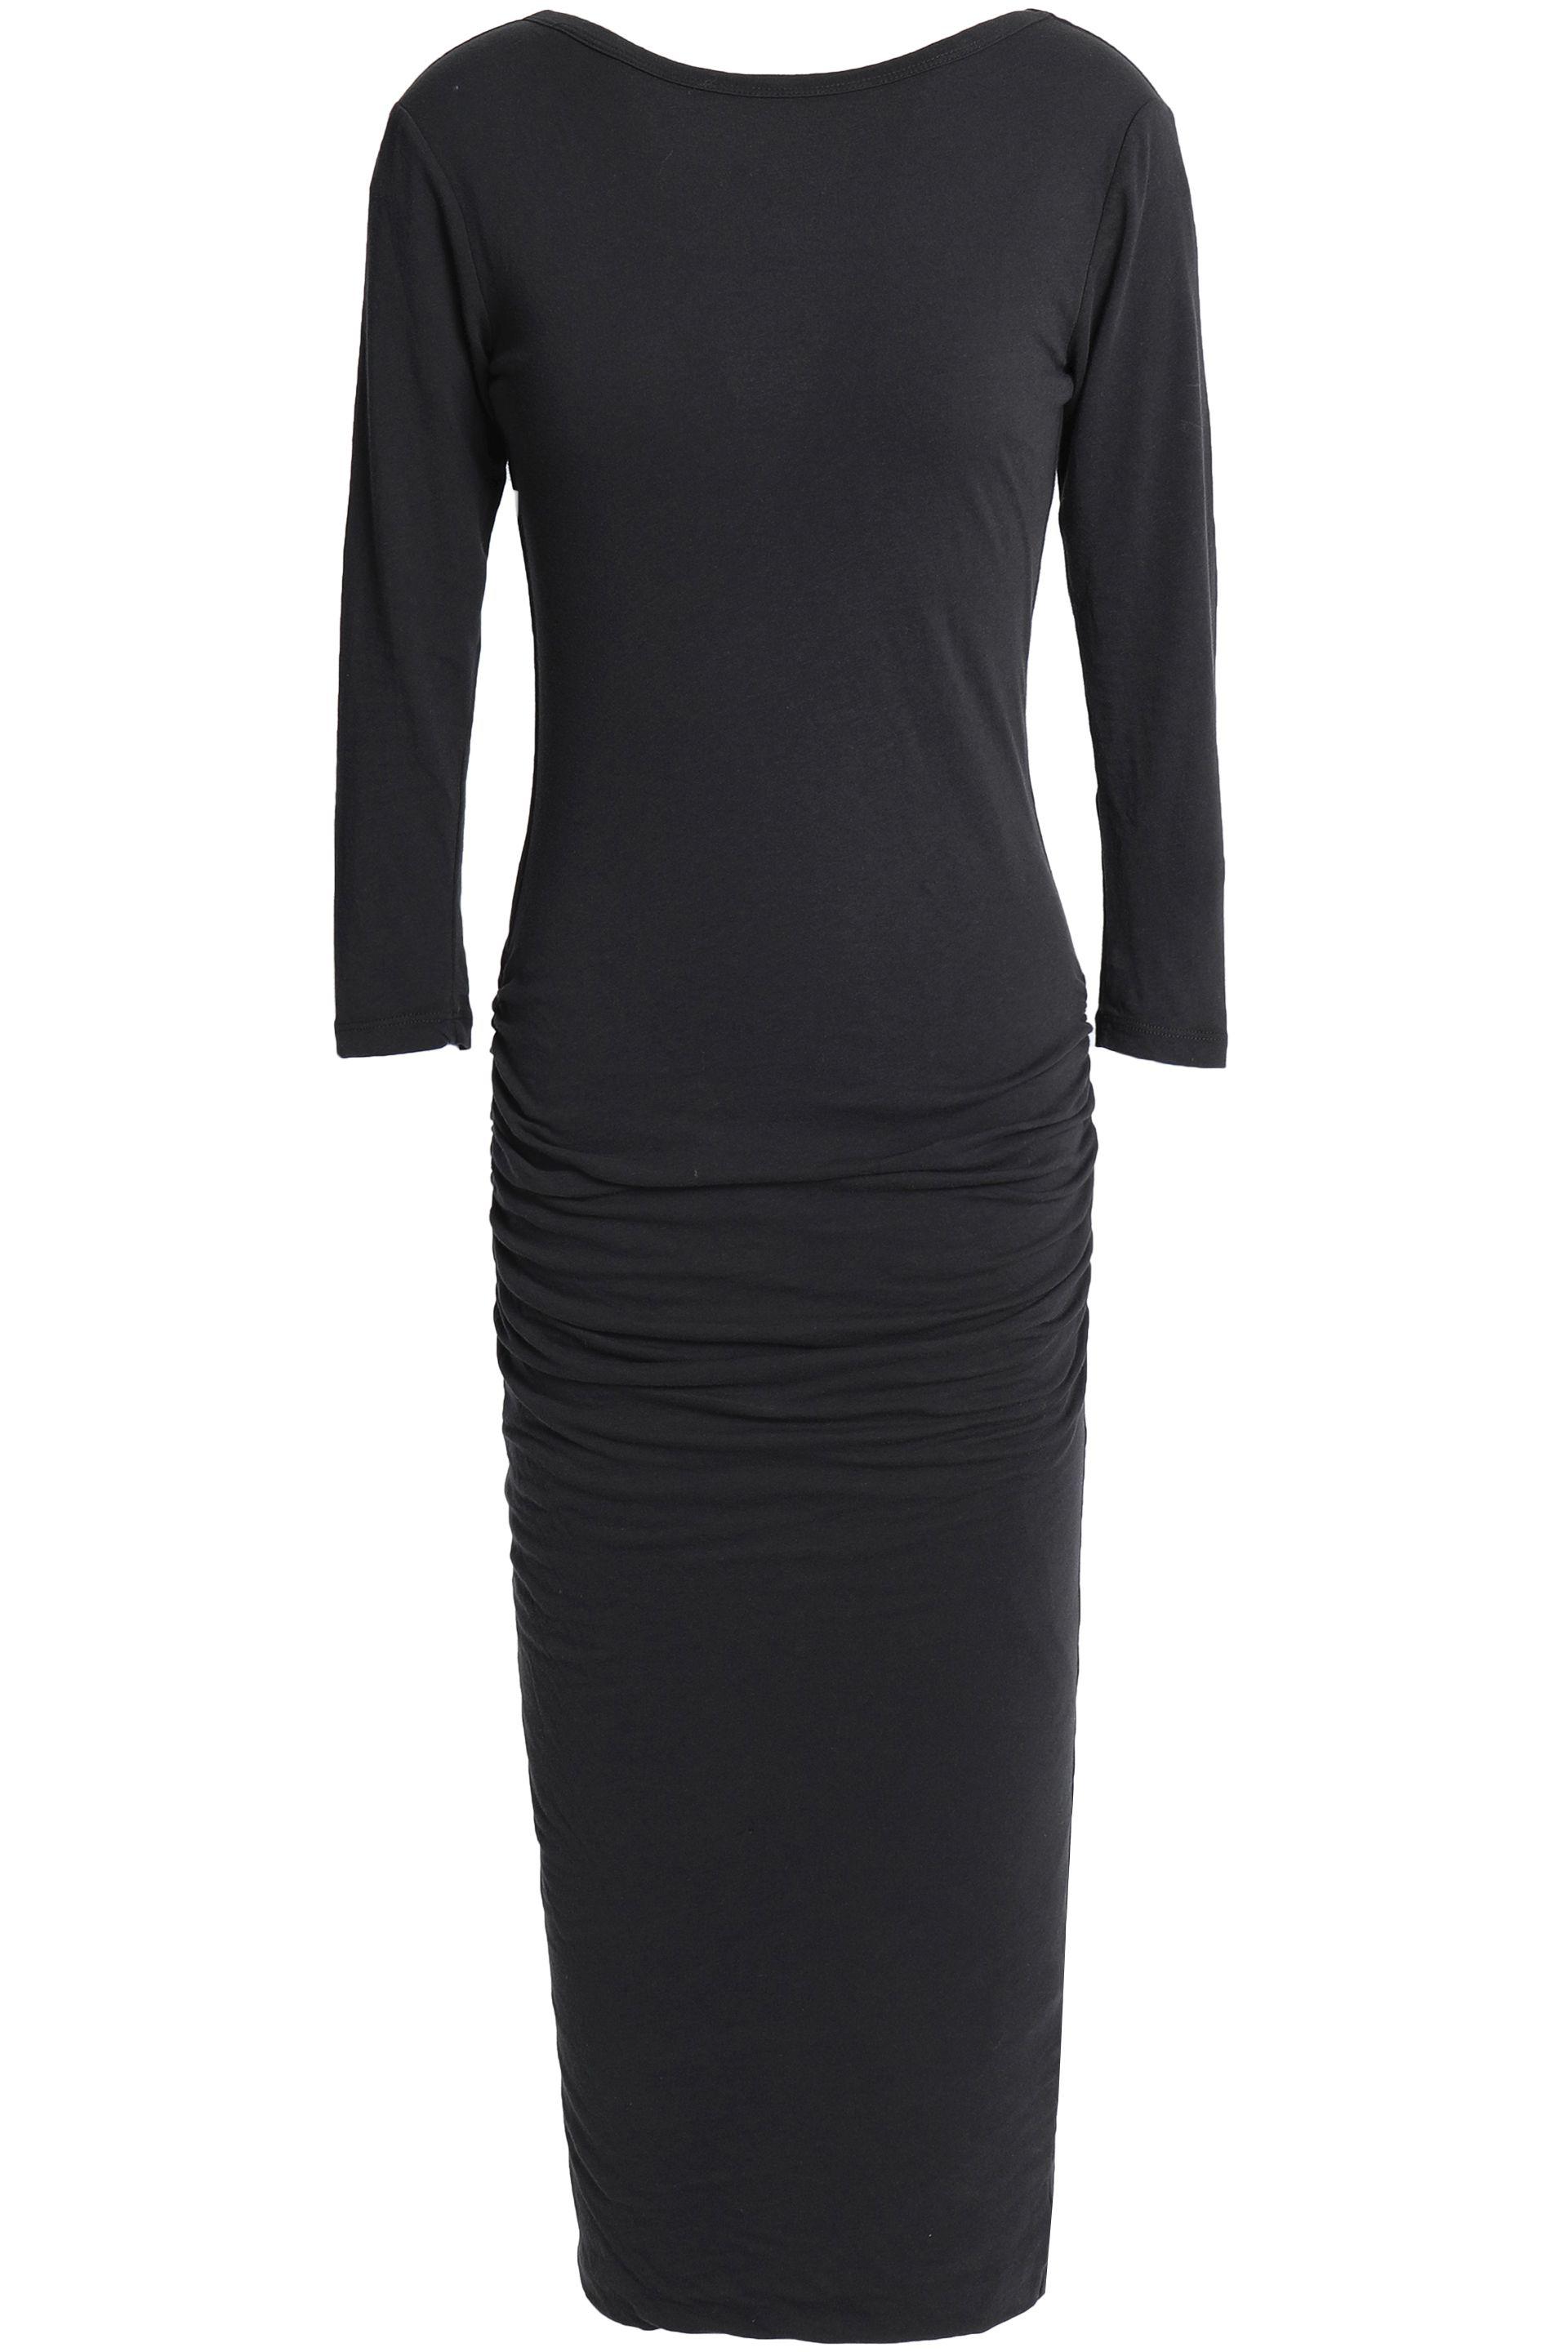 James Perse Ruched Stretch-cotton Jersey Dress in Anthracite (Black) - Lyst